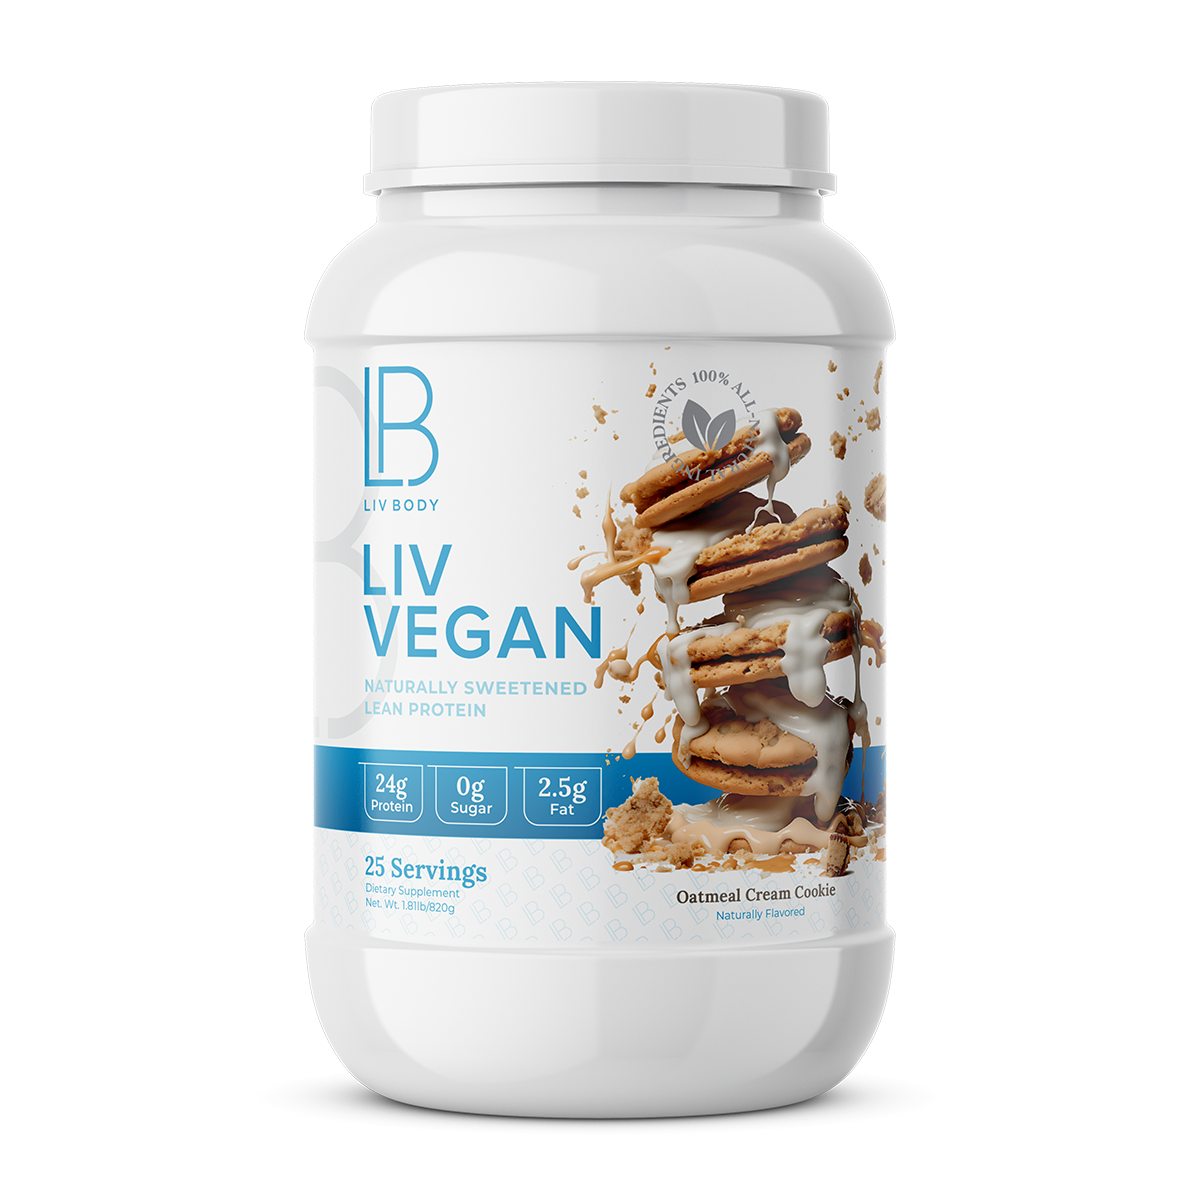 Image of LIV Vegan Protein, one of the best protein powders for women.